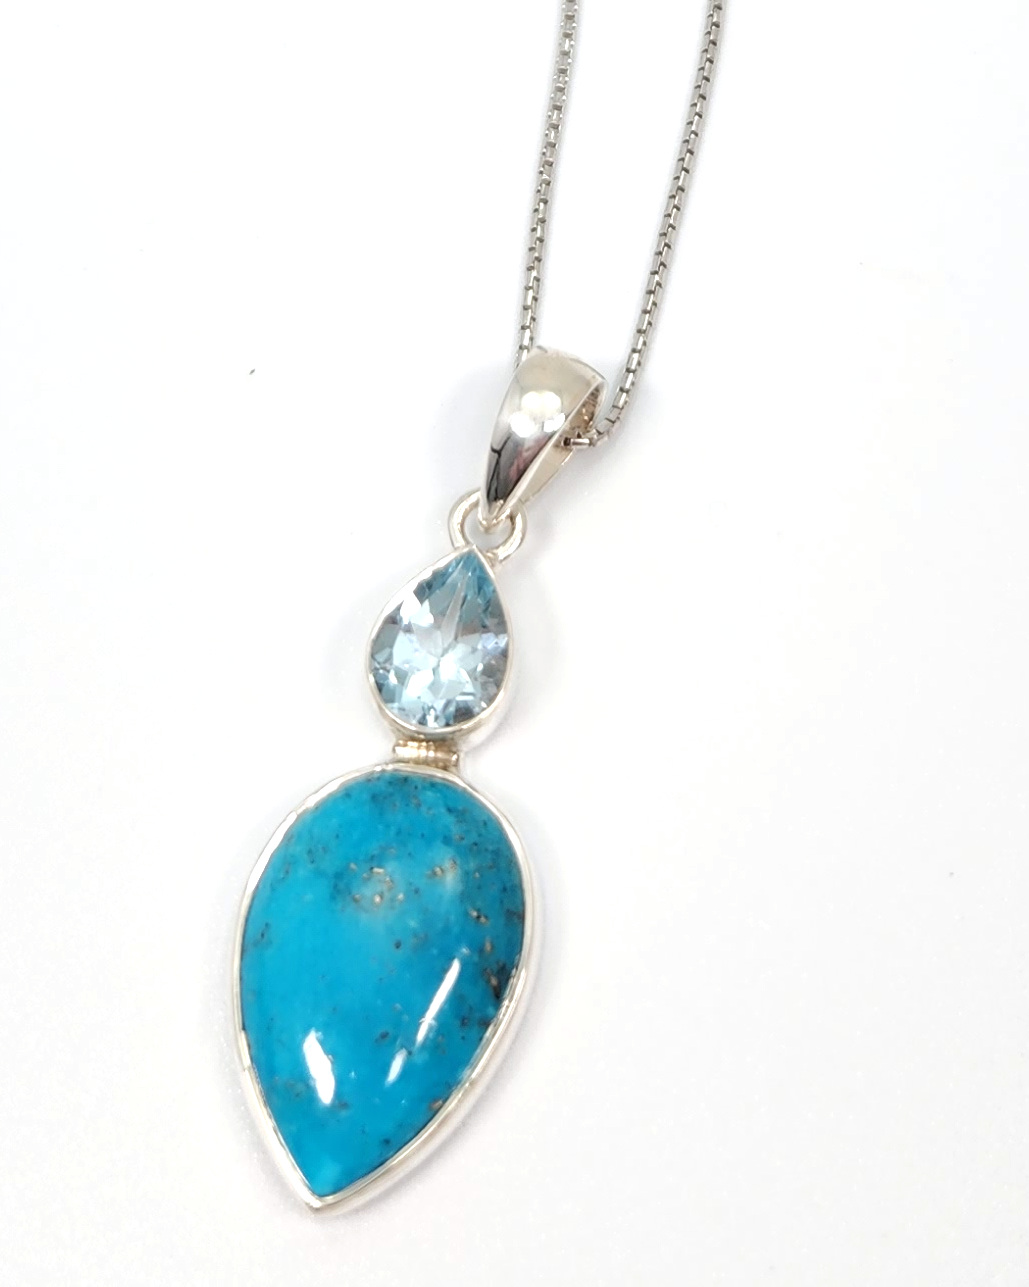 Blue topaz, turquoise, and sterling silver pendant on 18 inch chain